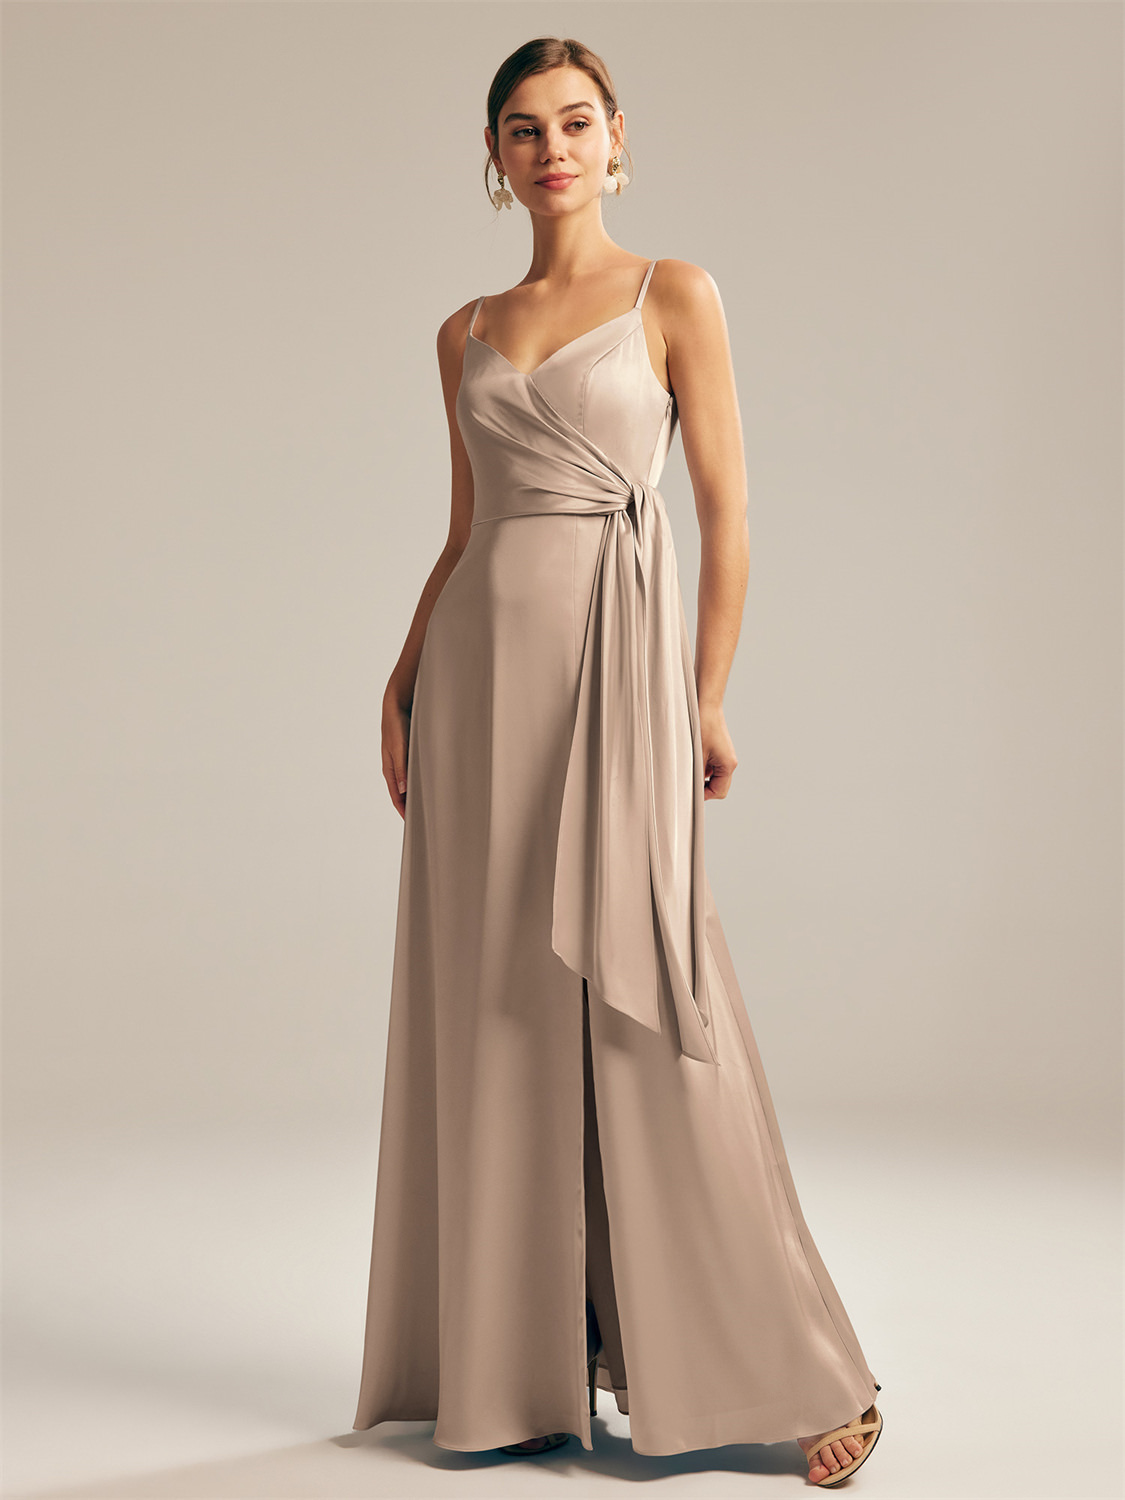 Bridesmaid Dress Colors 2023 - Taupe